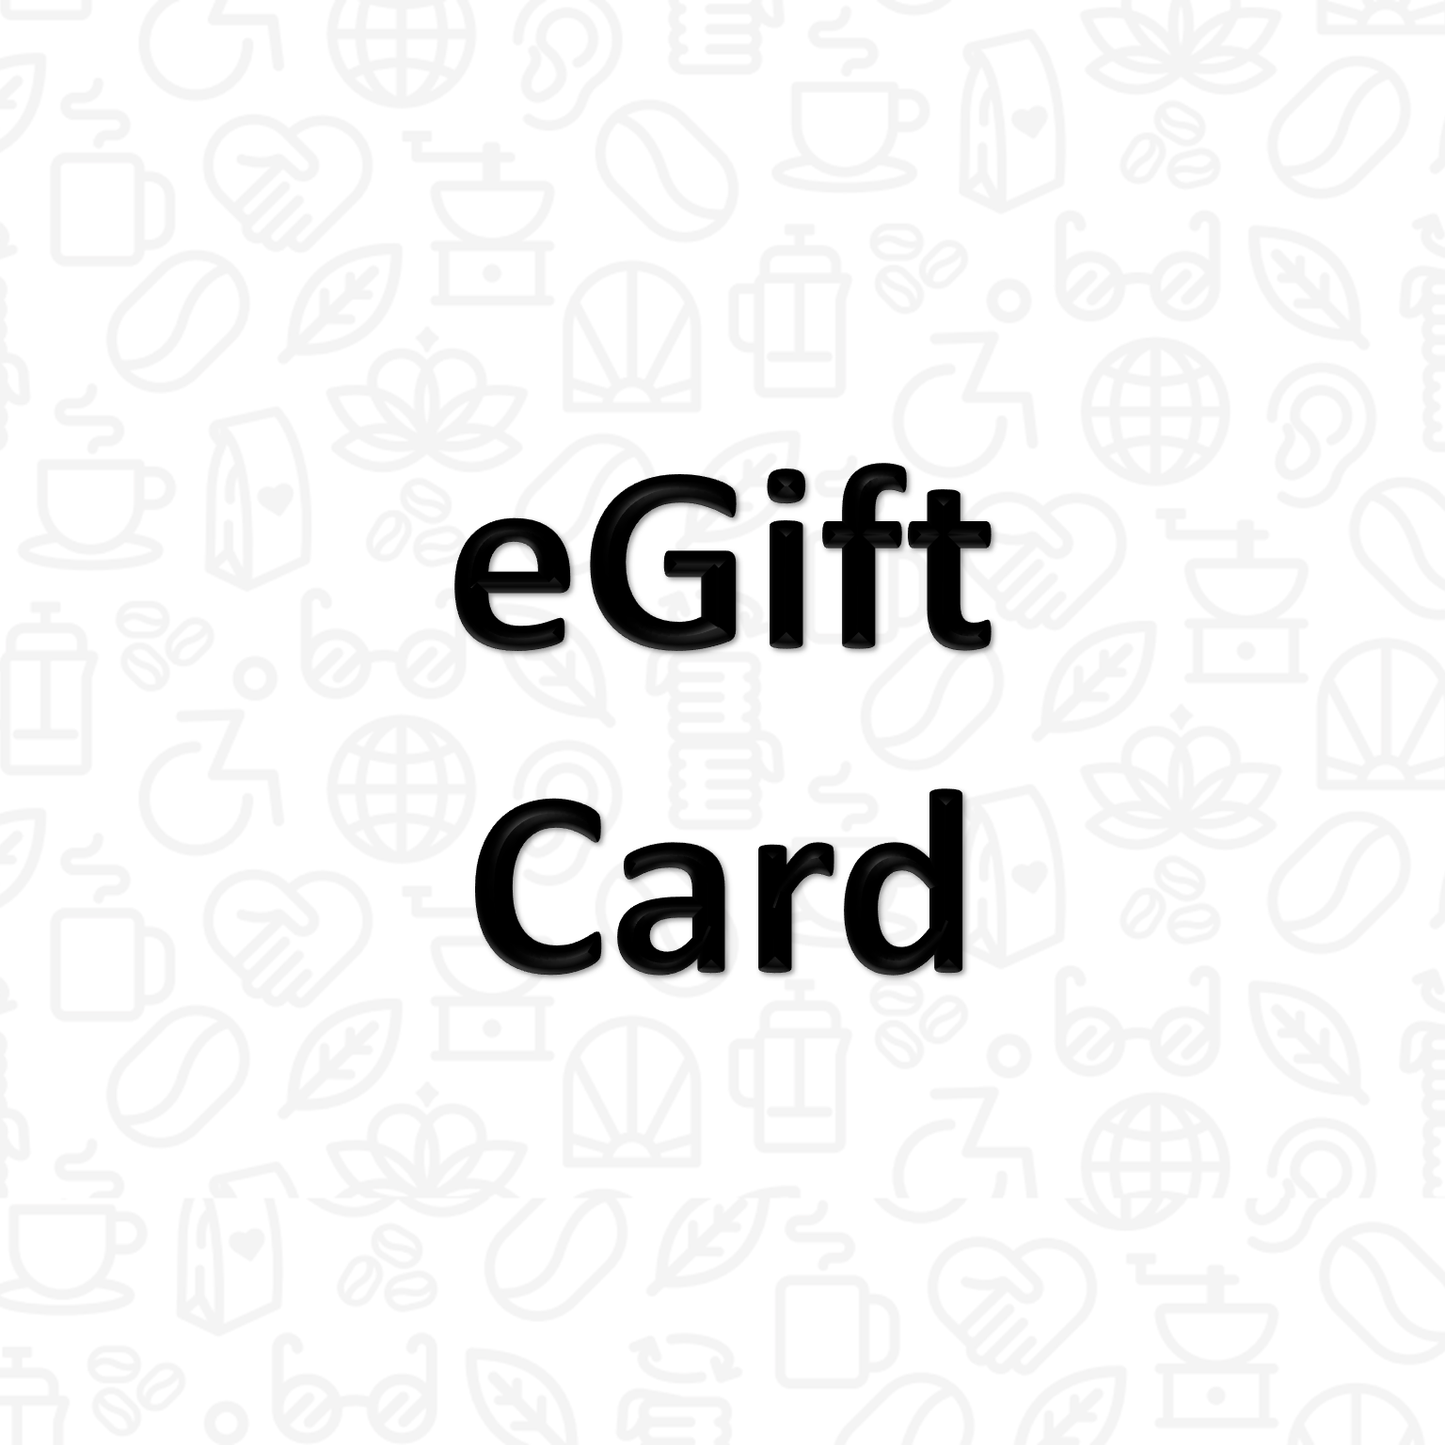 The words "eGift Card" on a background covered with coffee and disability icons in line art